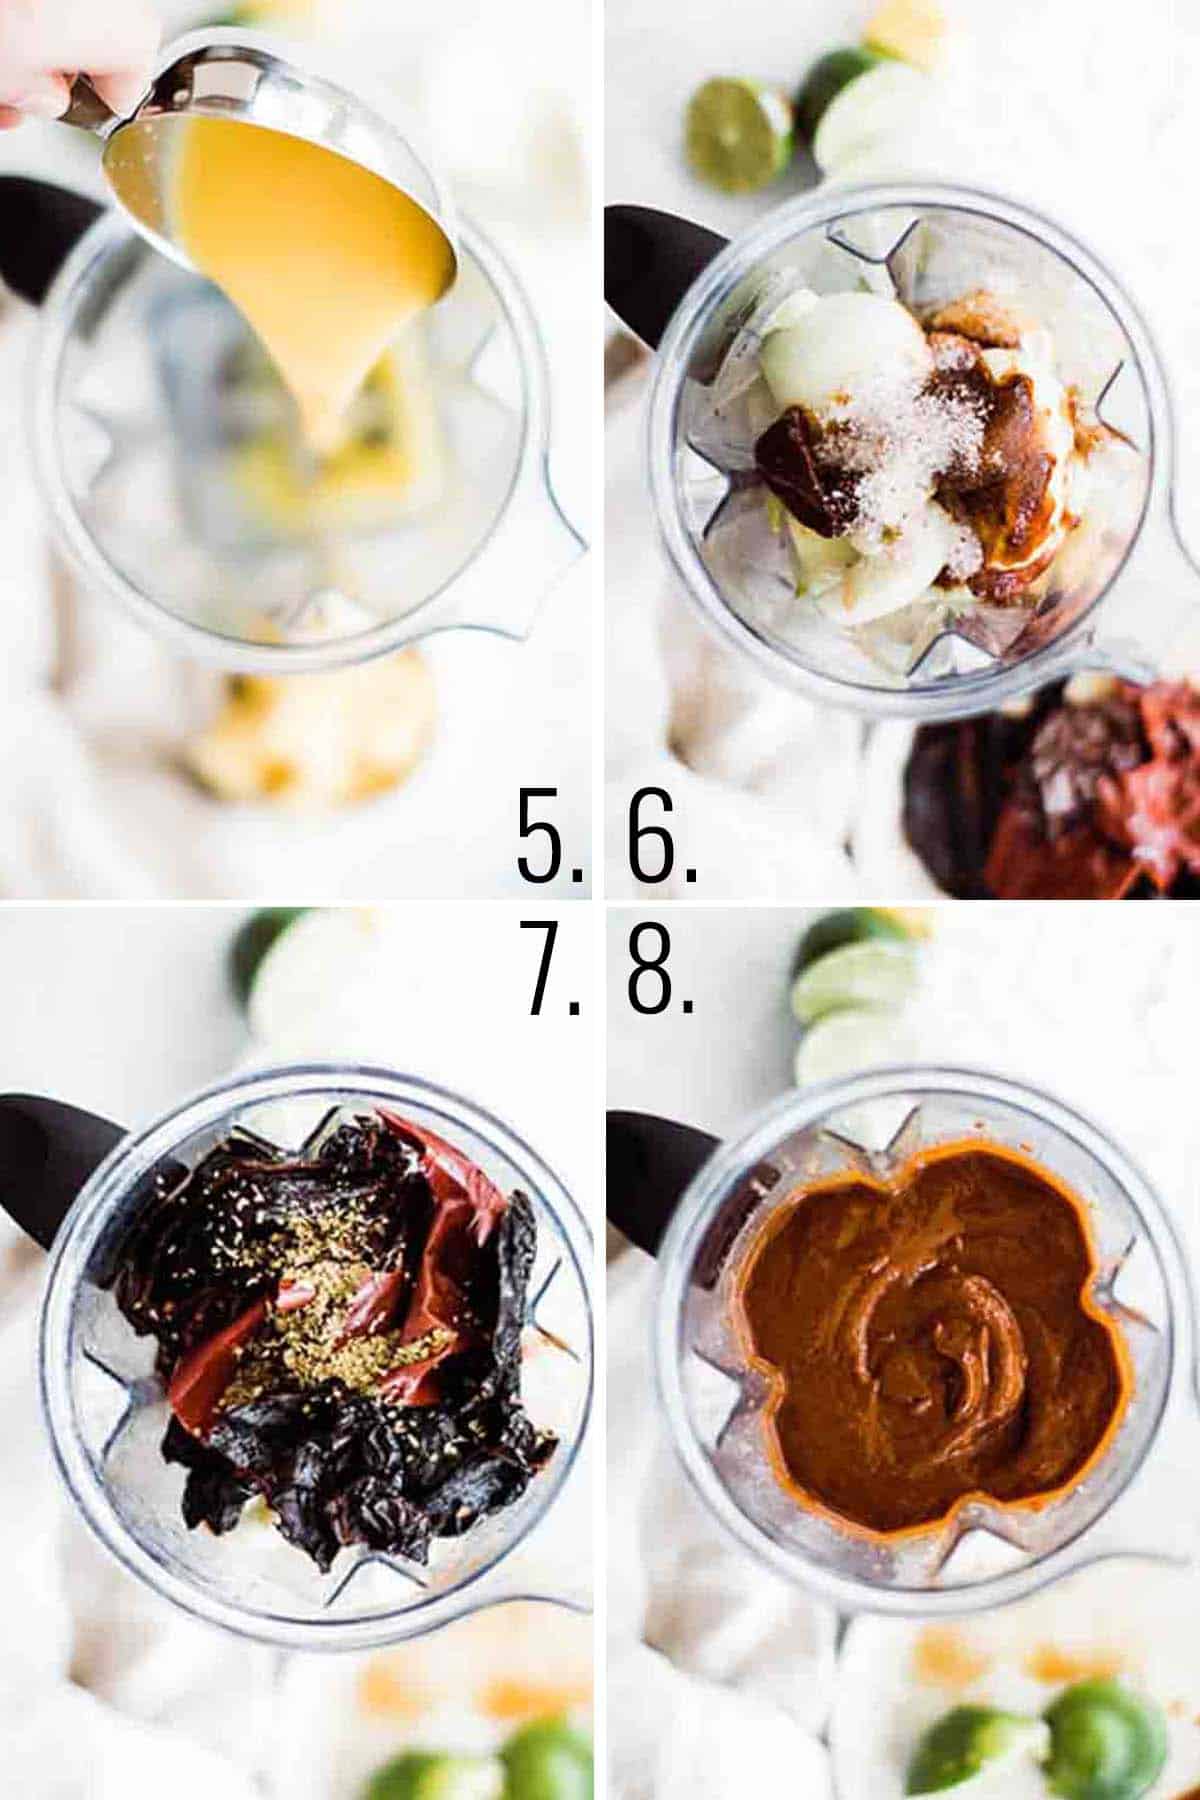 A collage showing the steps to make the al pastor marinade.